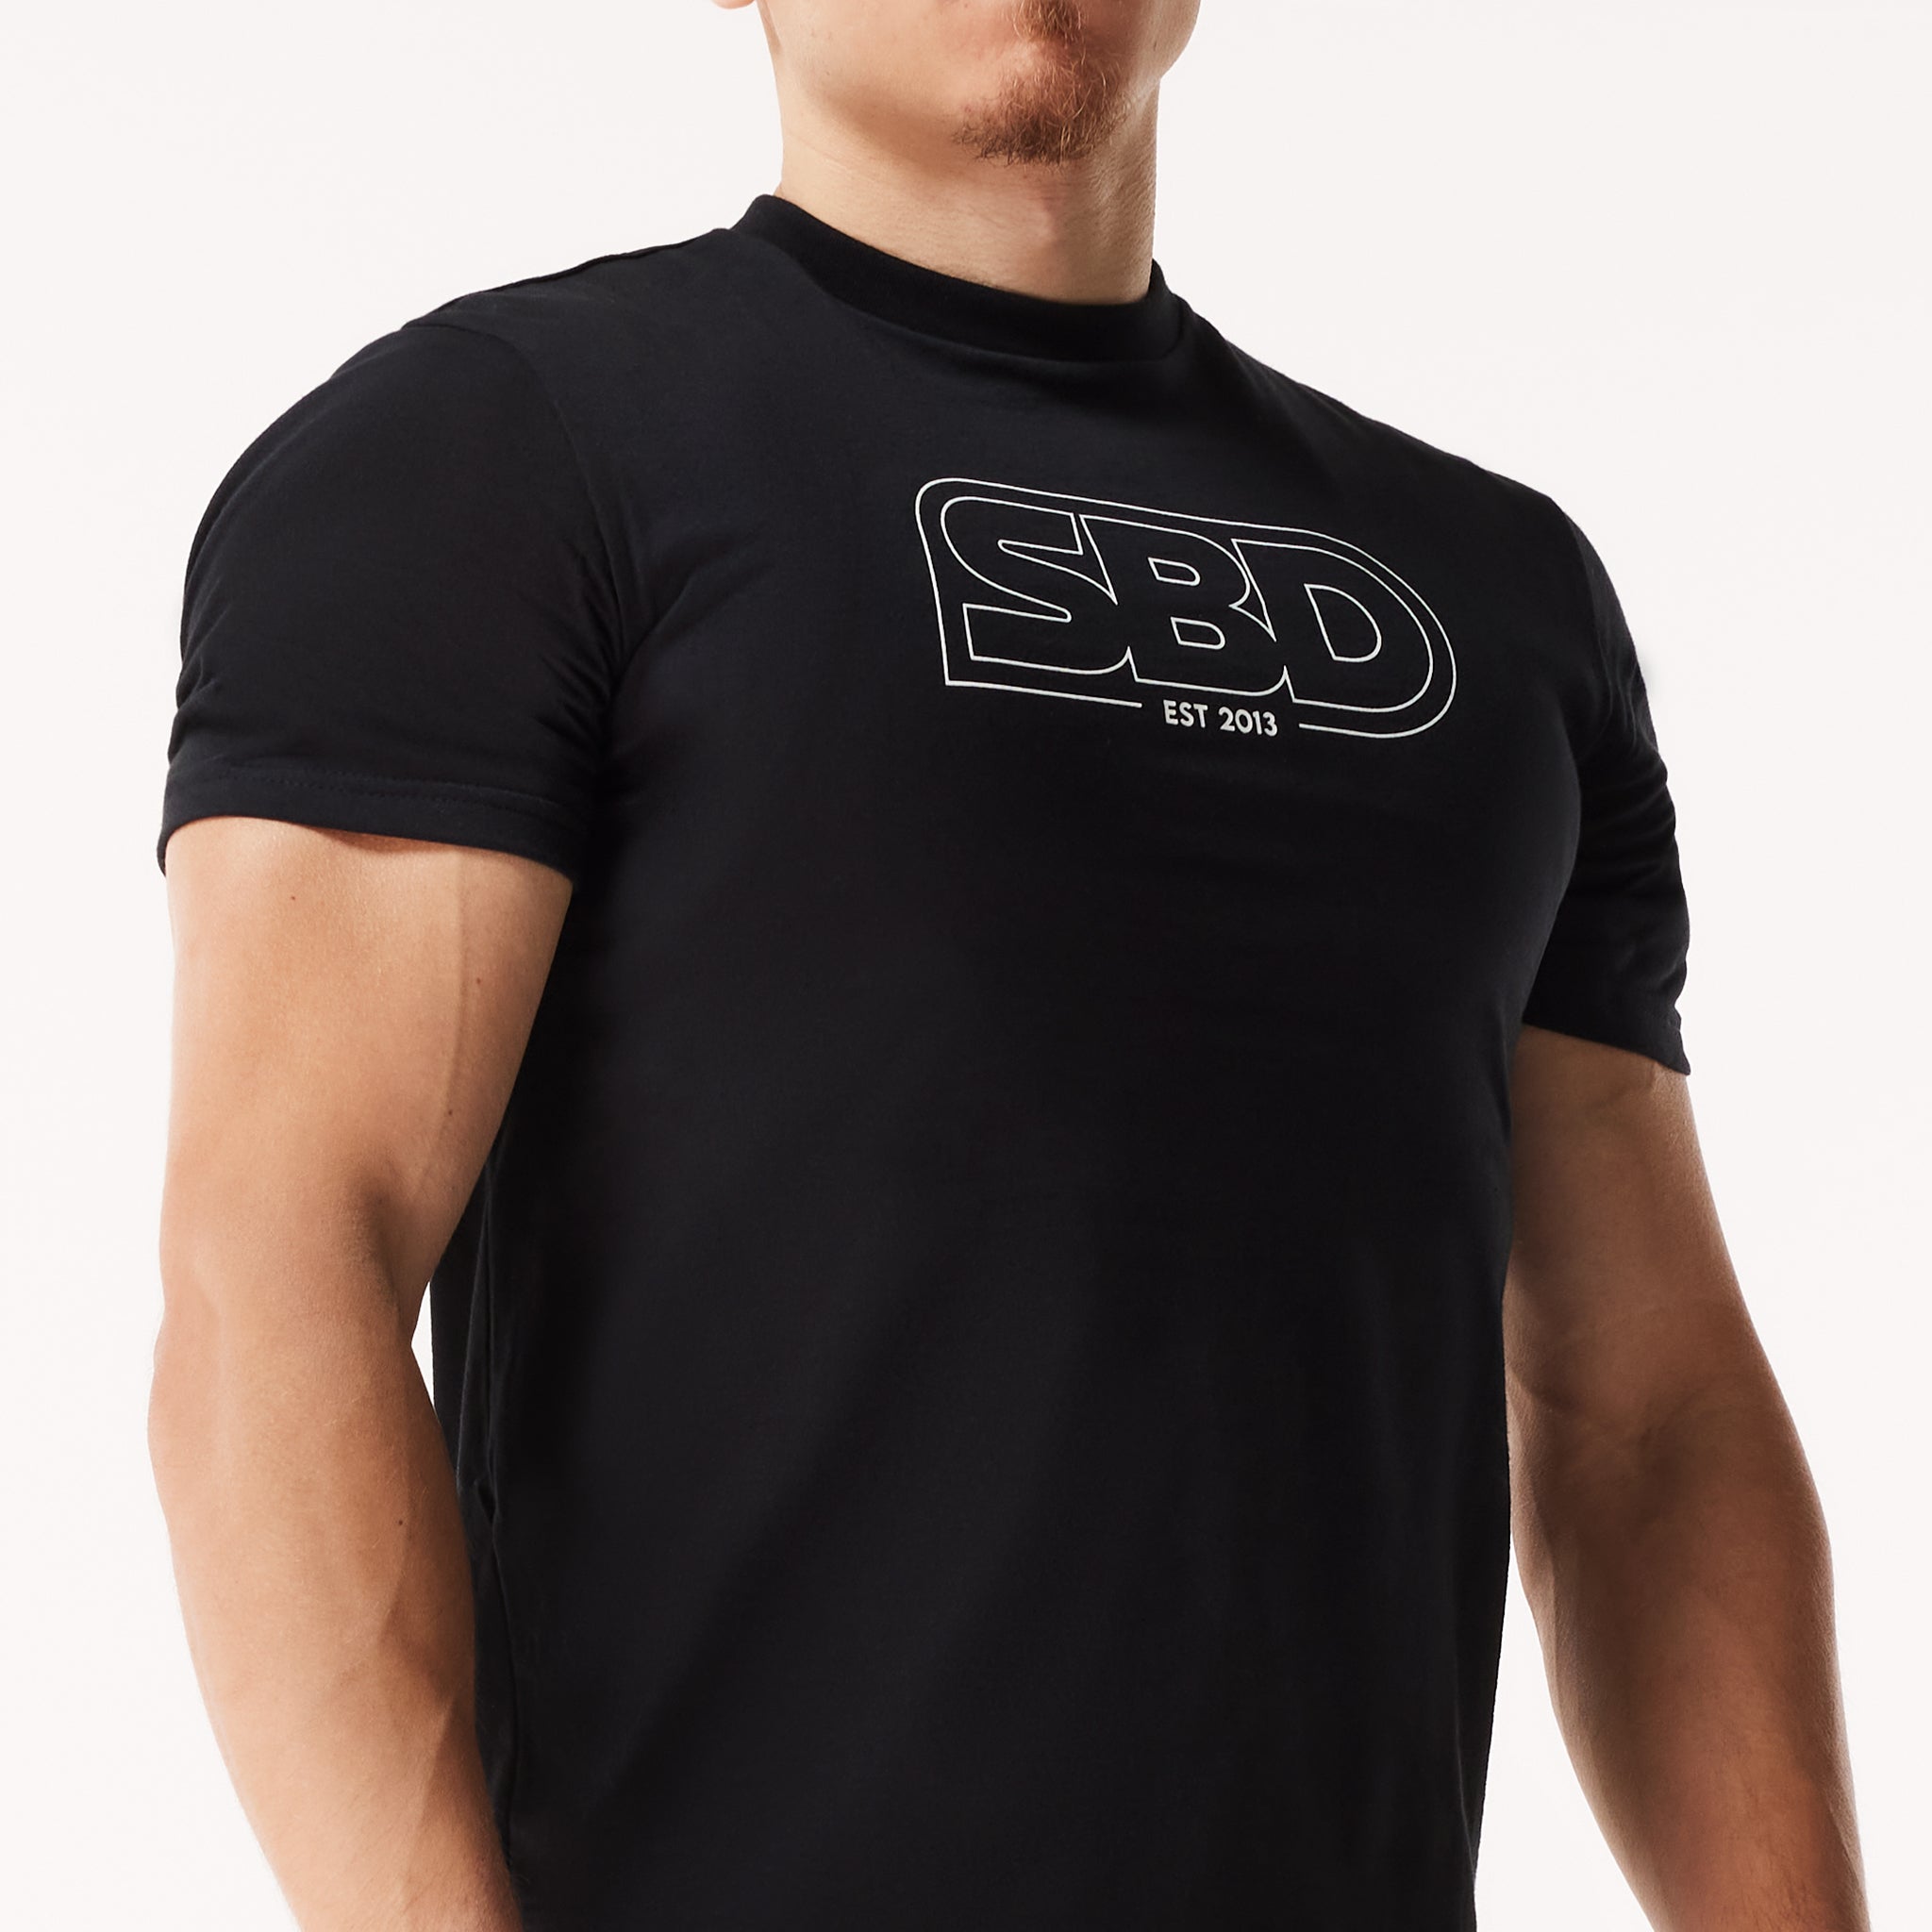 SBD T-shirt Momentum Limited Edition